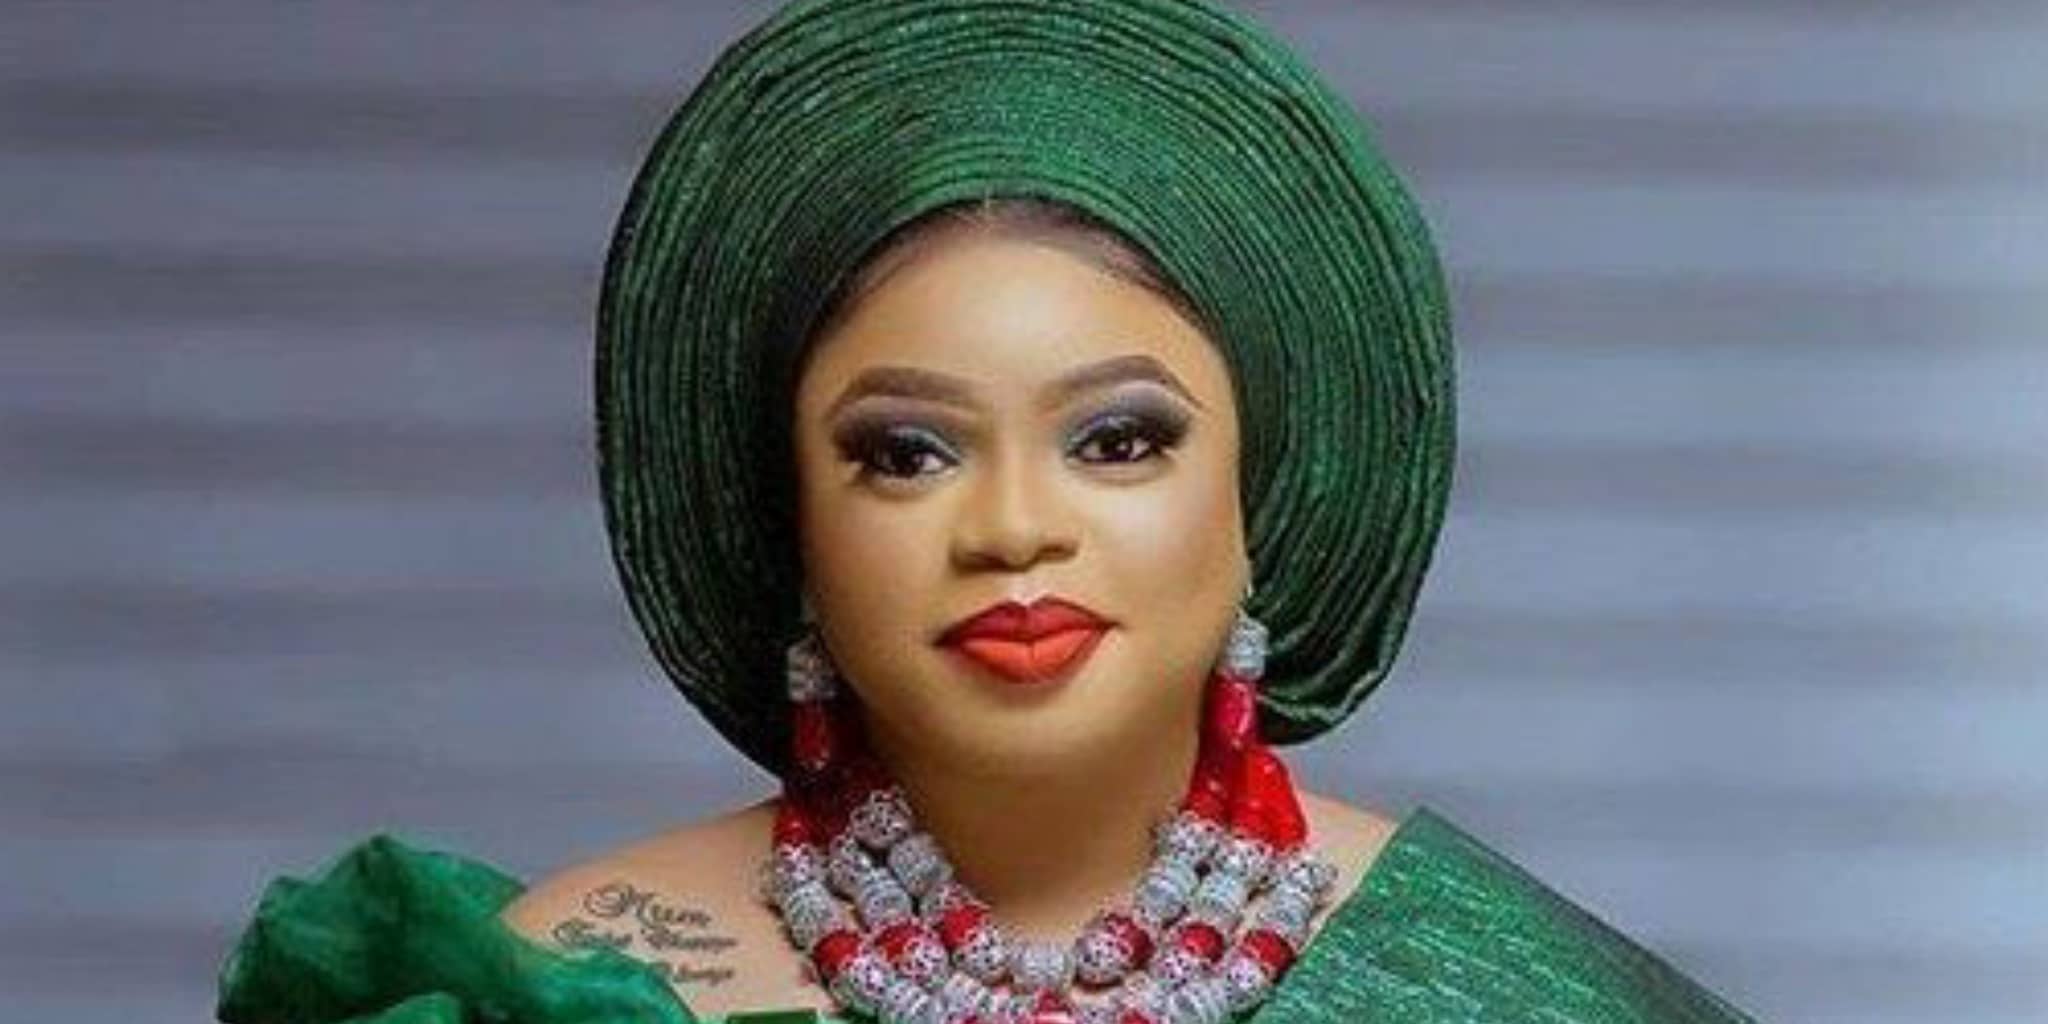 Bobrisky biography, age, wife, surgery, wedding, real face, parents, net worth, other updates